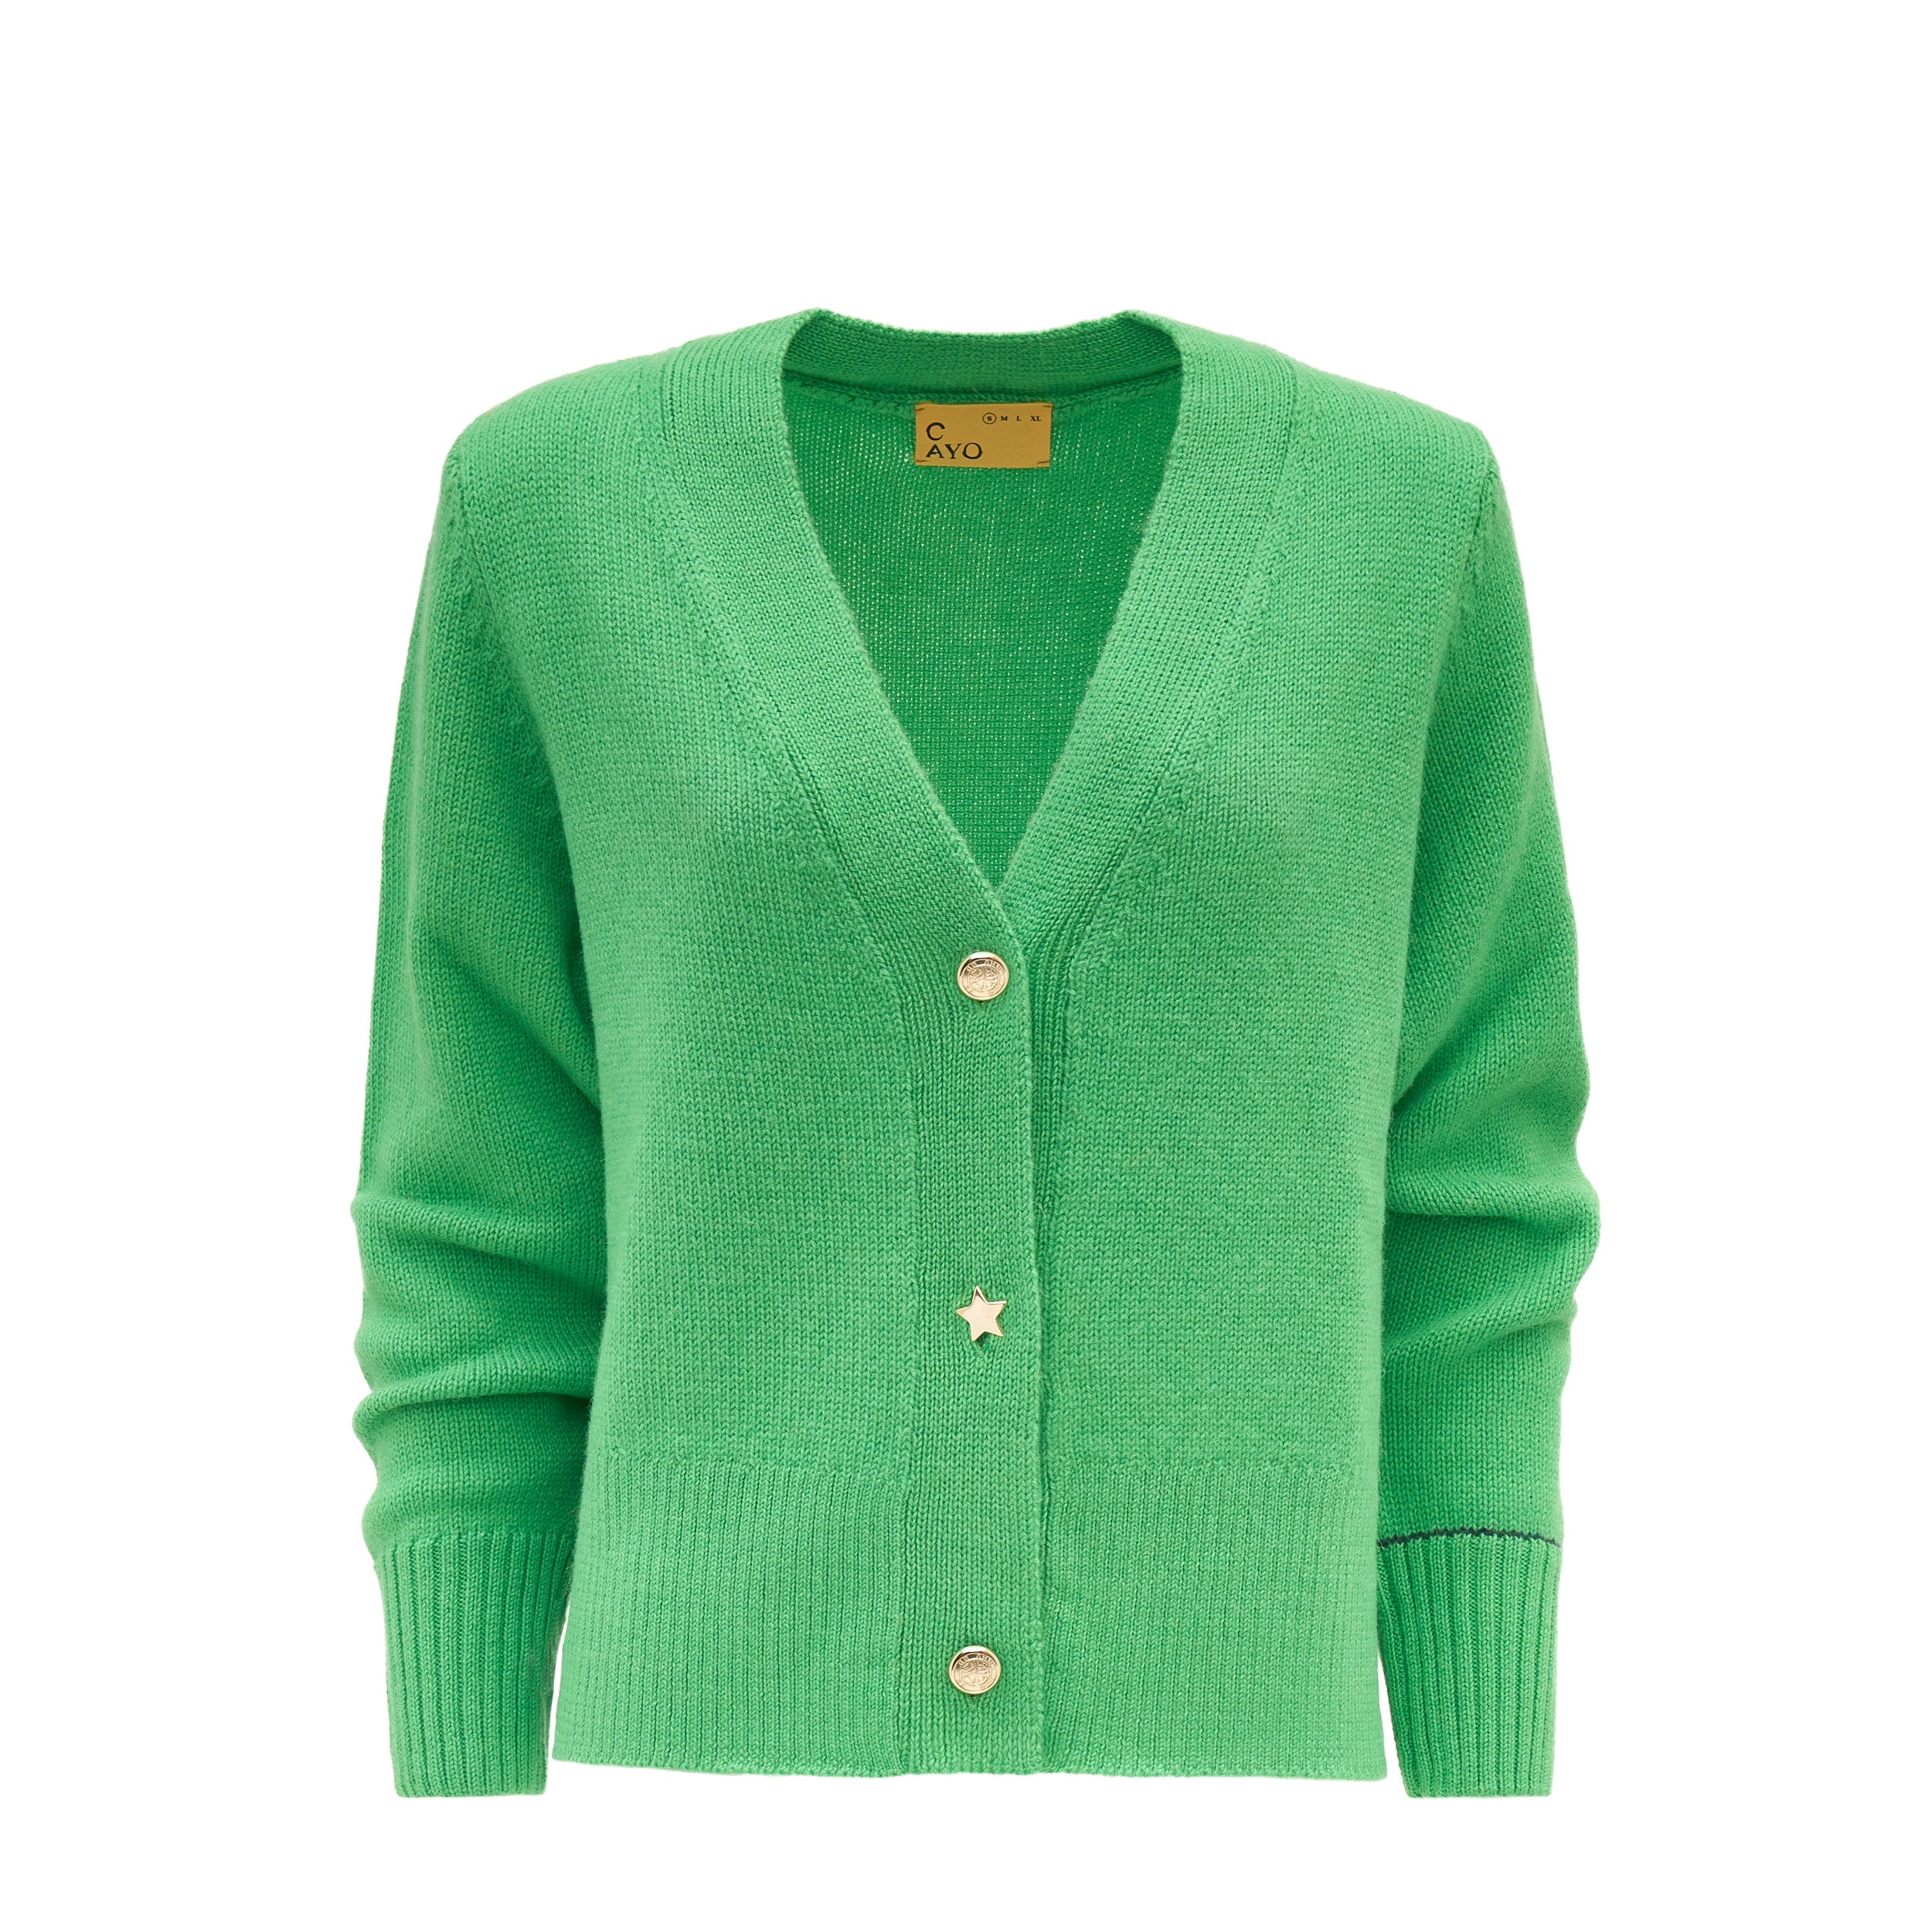 The Button Up - Vibrant Green